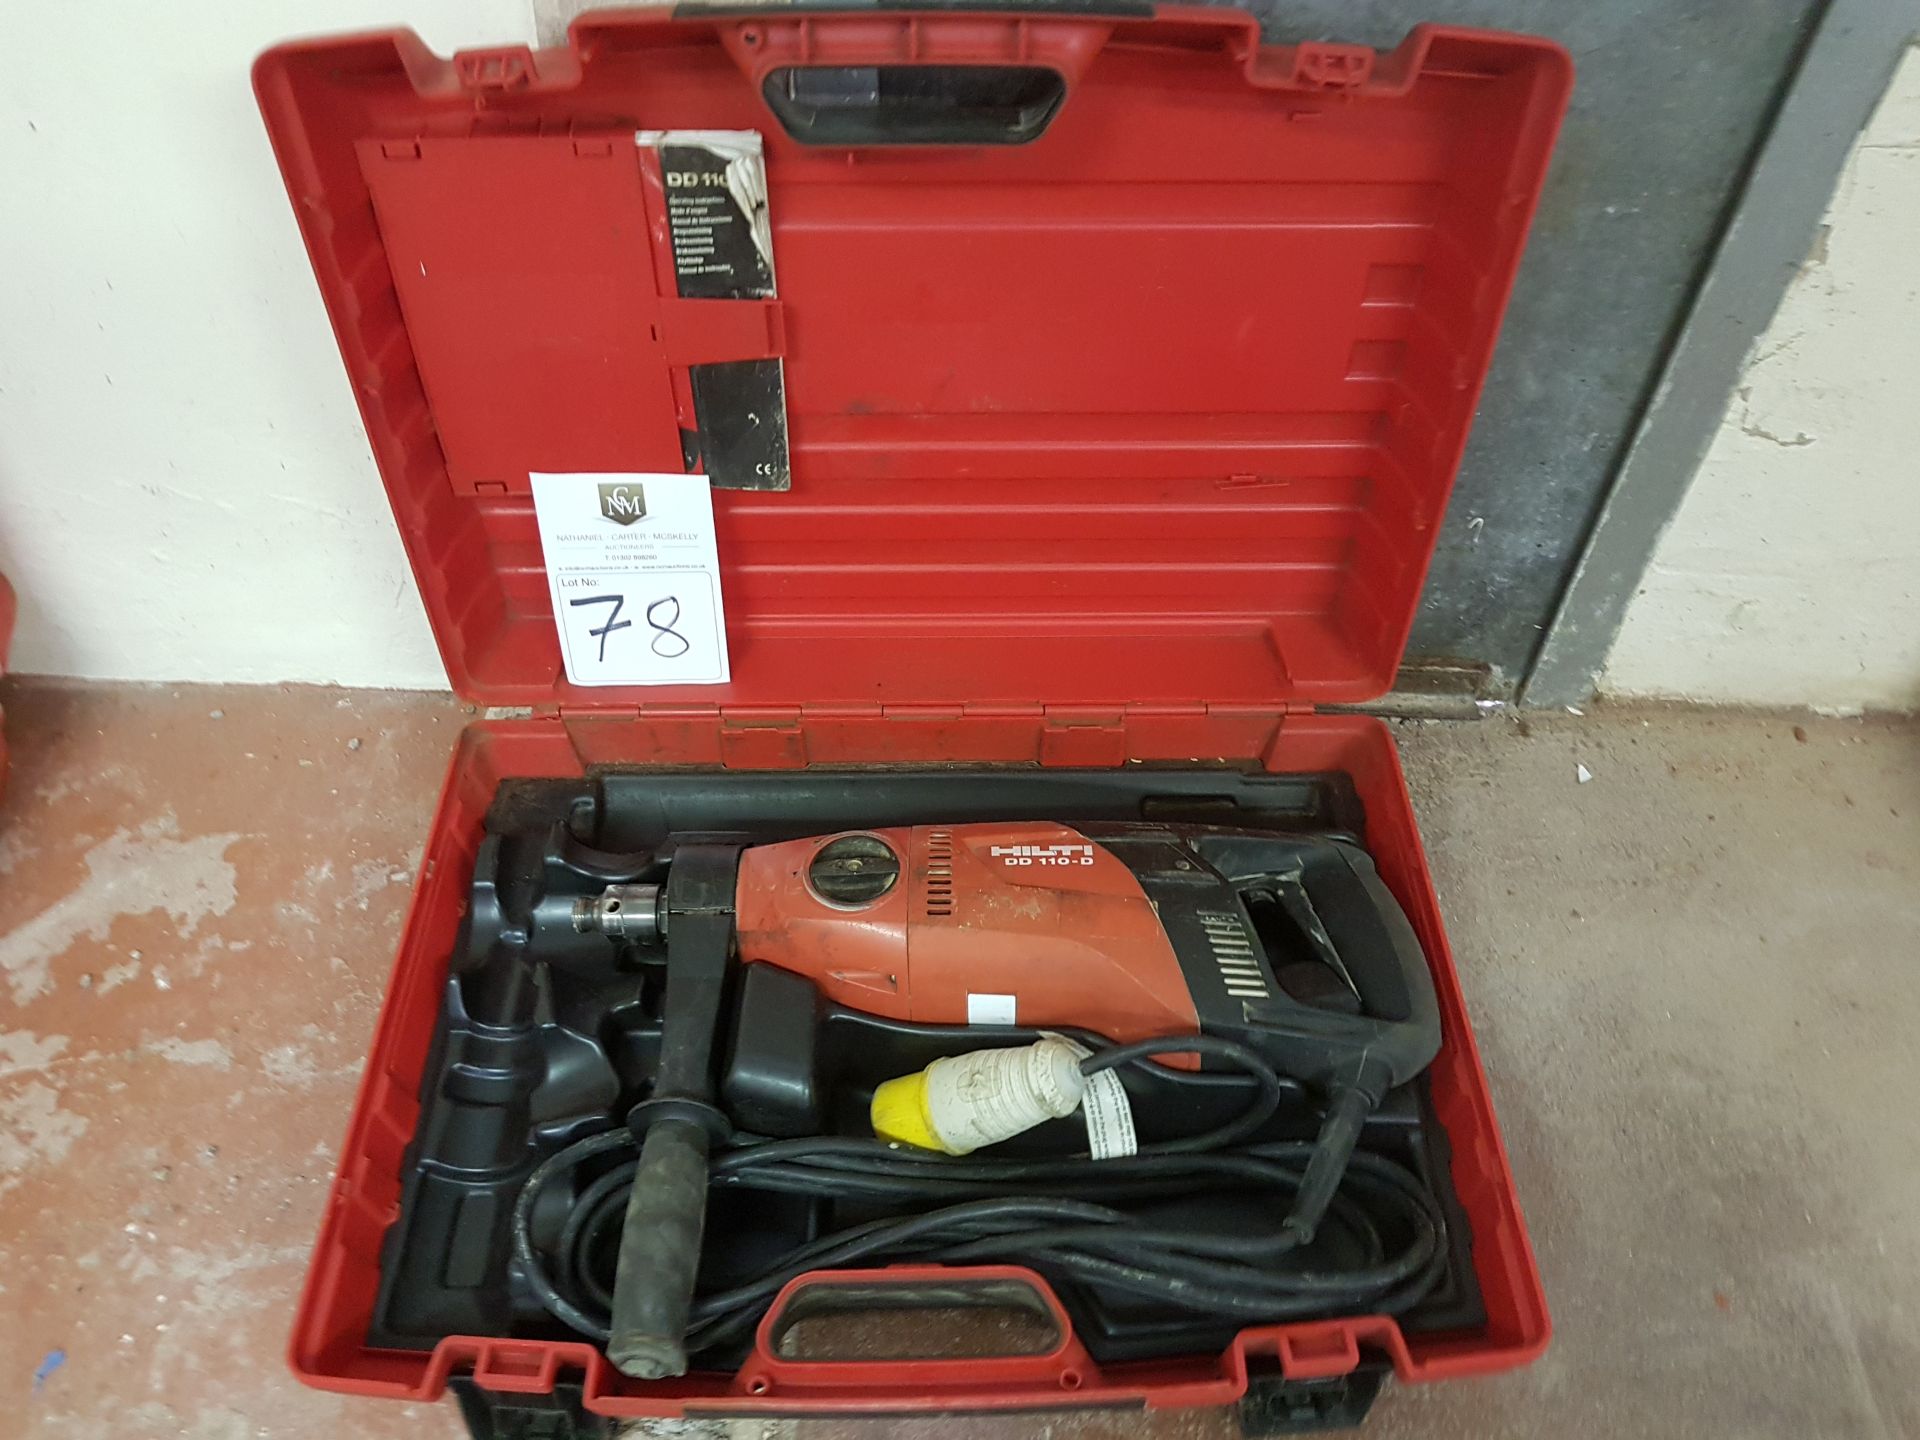 Hilti DD 110 D 110v drill in box - Tested / In working order